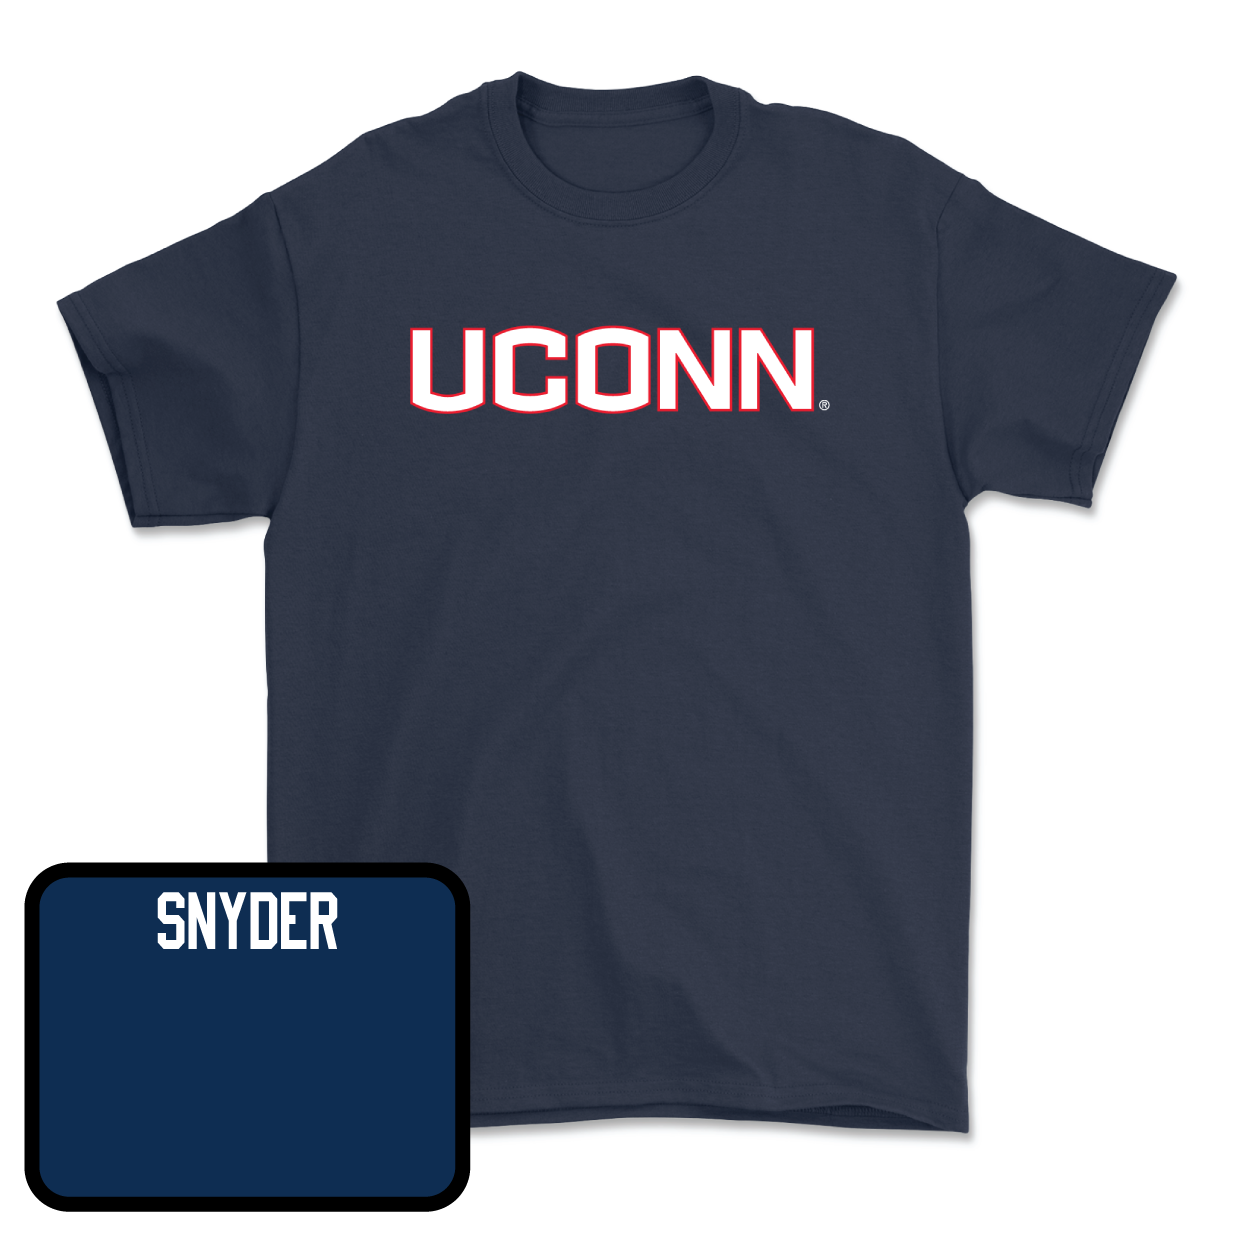 Navy Men's Track & Field UConn Tee Youth Large / Travis Snyder | #